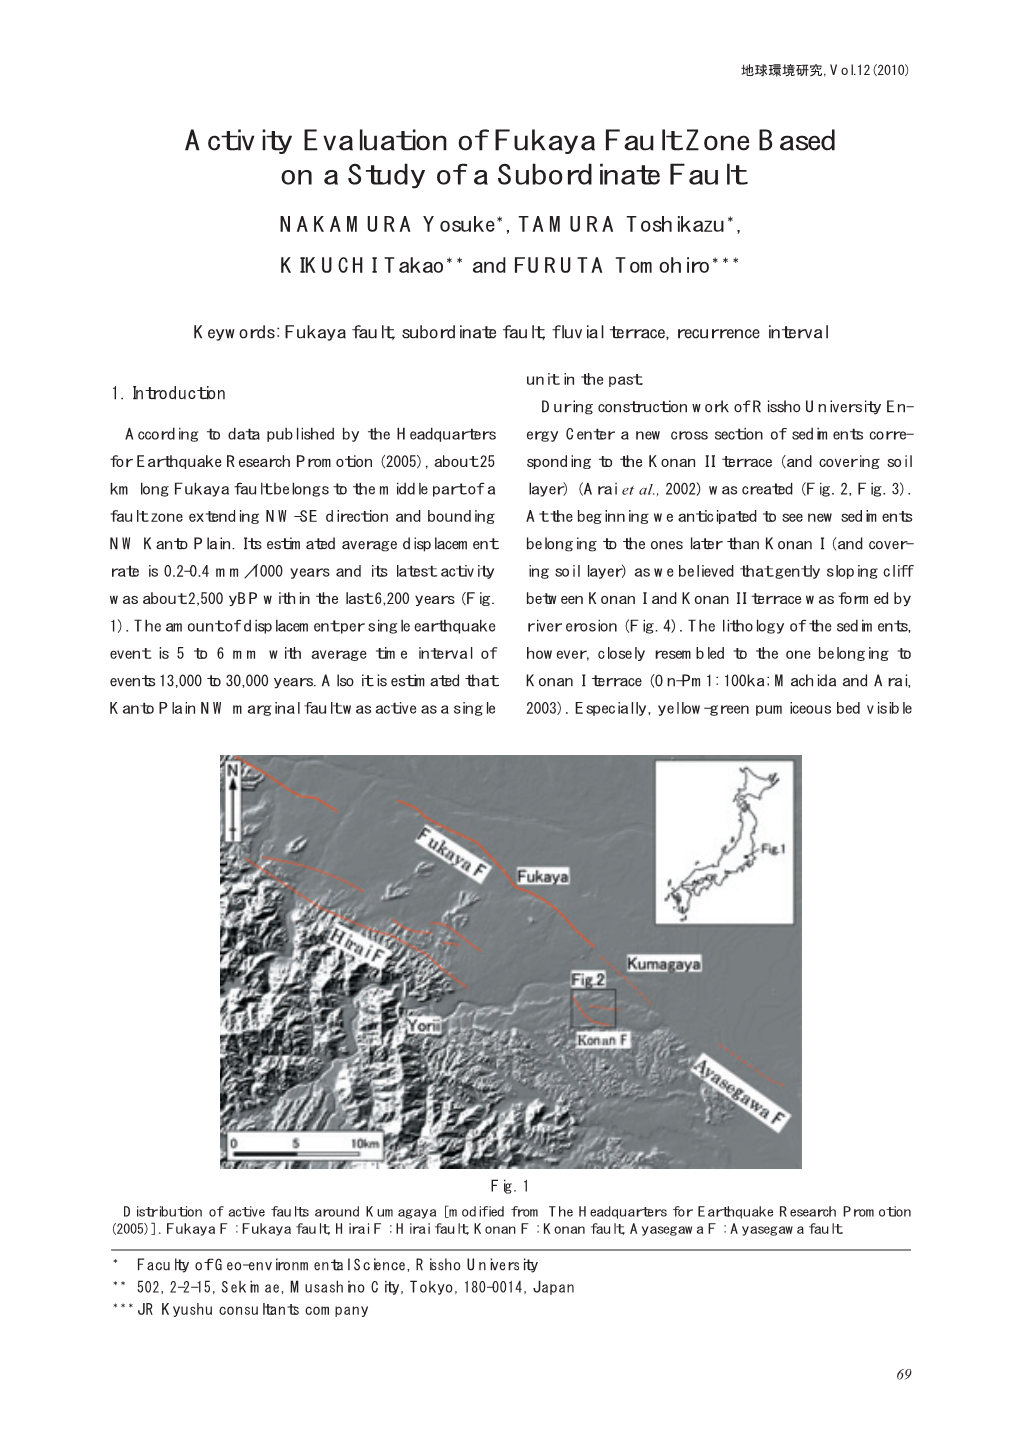 Activity Evaluation of Fukaya Fault Zone Based on a Study of a Subordinate Fault